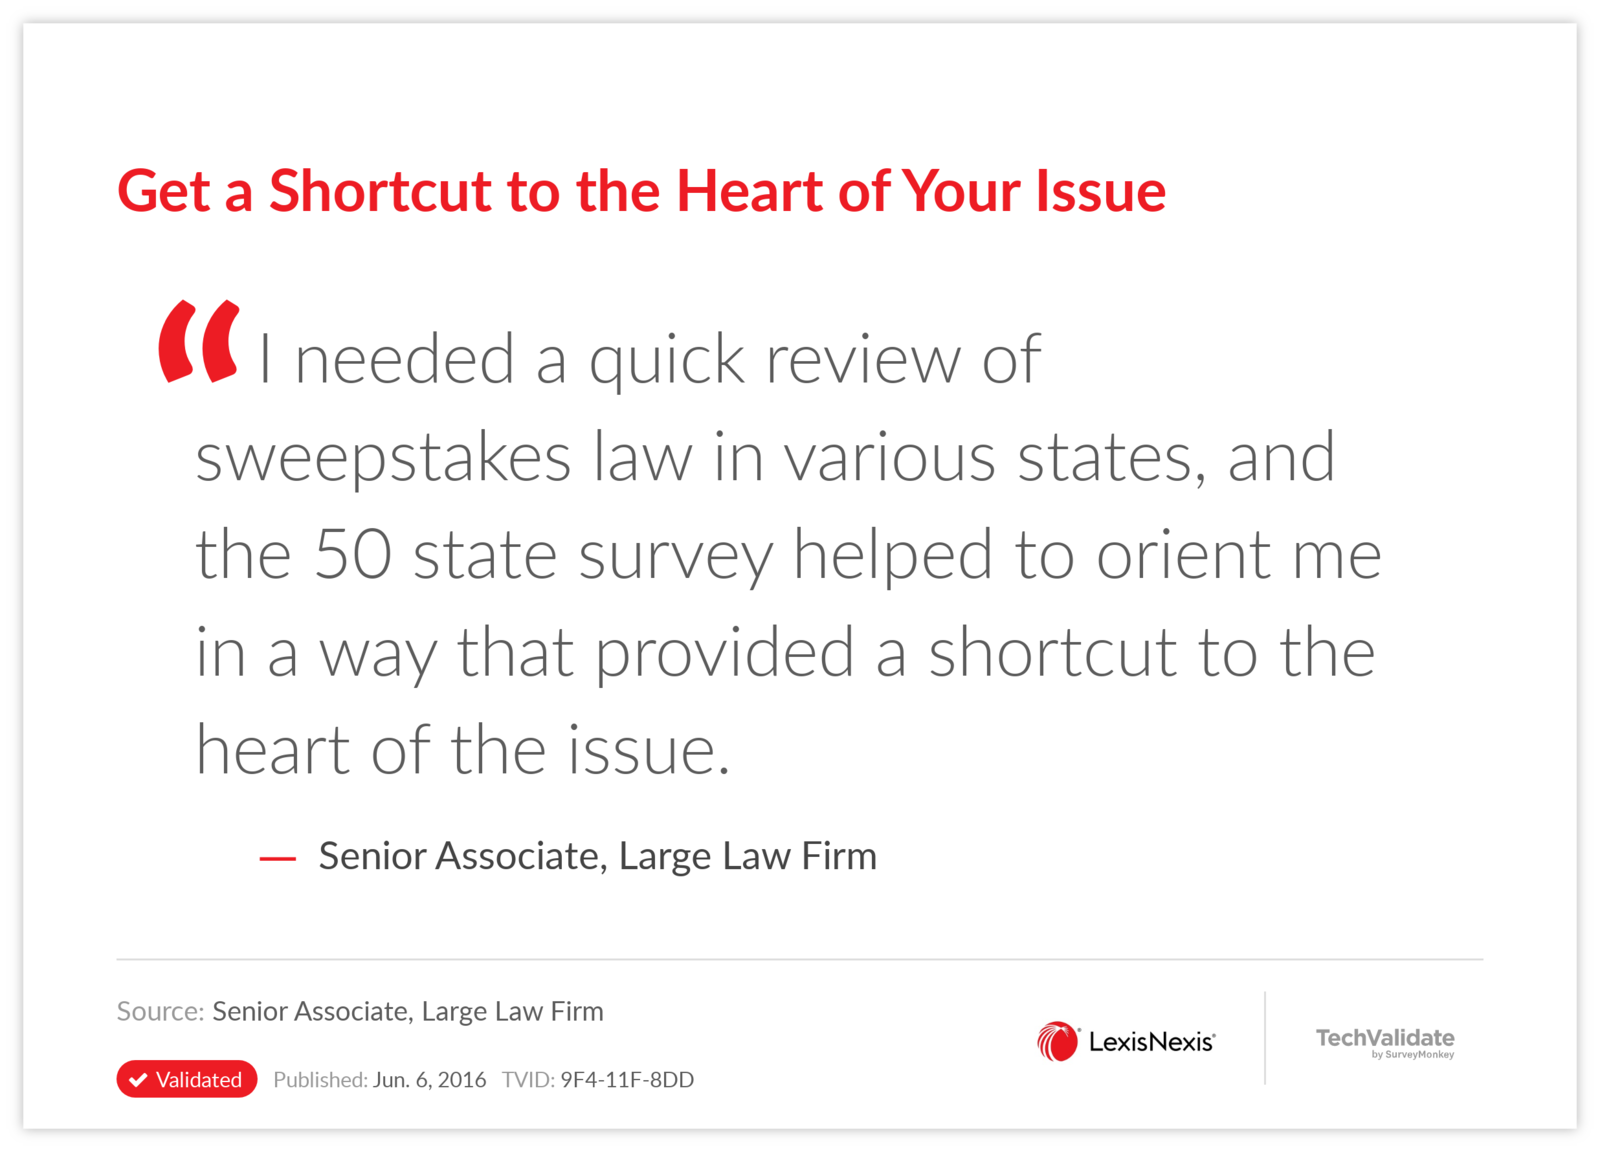 Get a Shortcut to the Heart of Your Issue